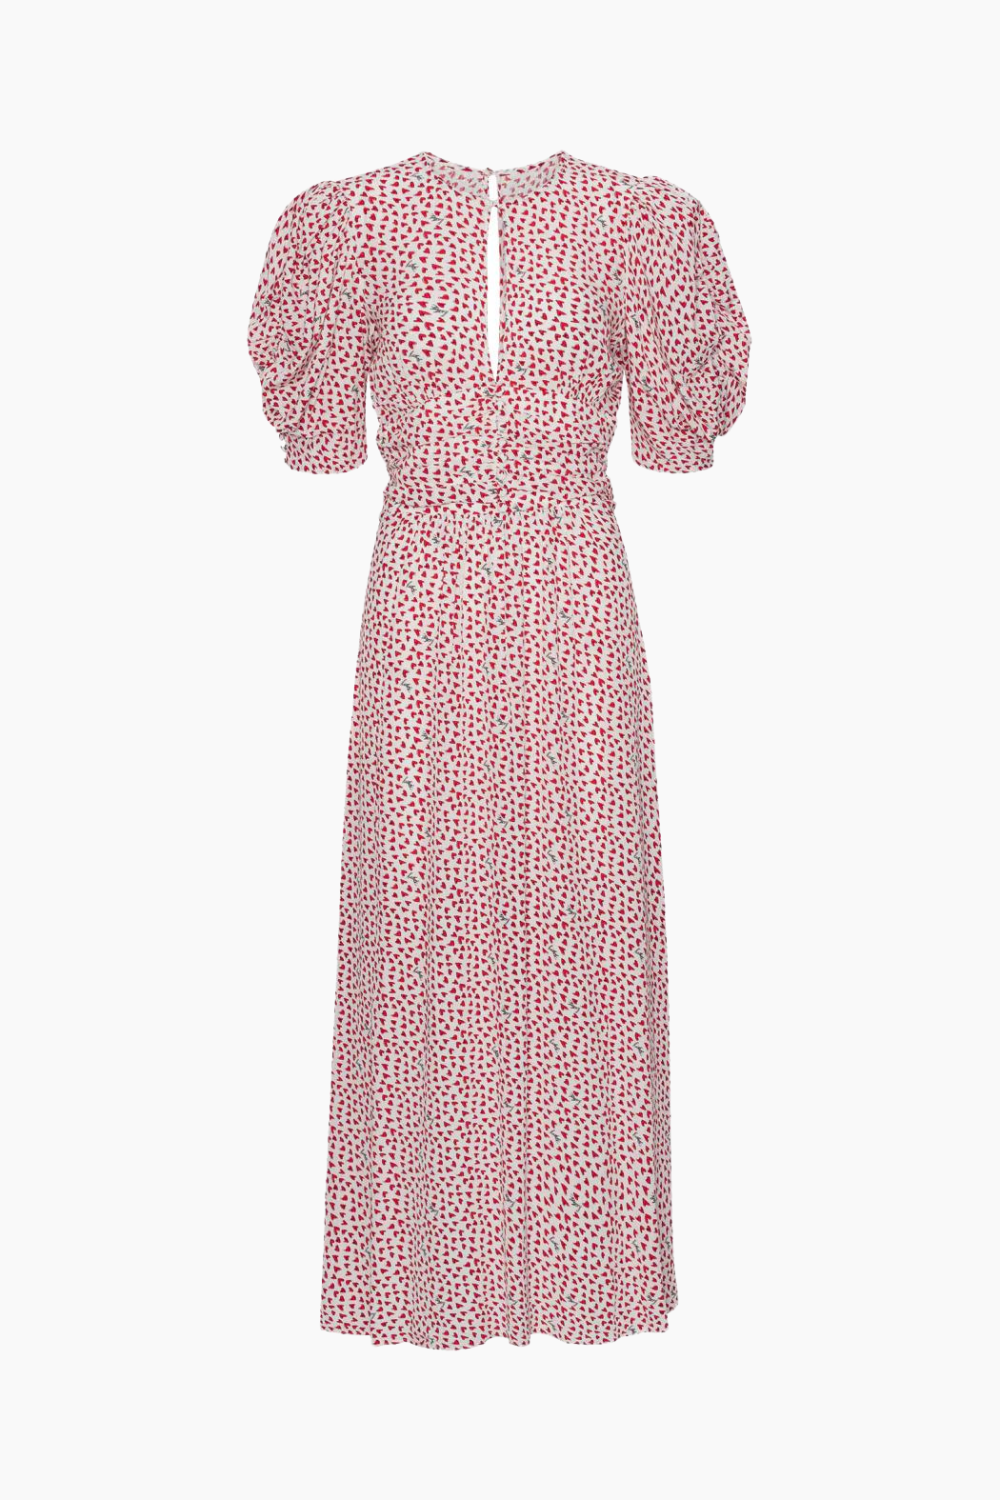 Billede af Printed Maxi Flowy Dress - Happy Hearts/Bright White Comb. - ROTATE - Mønstret S